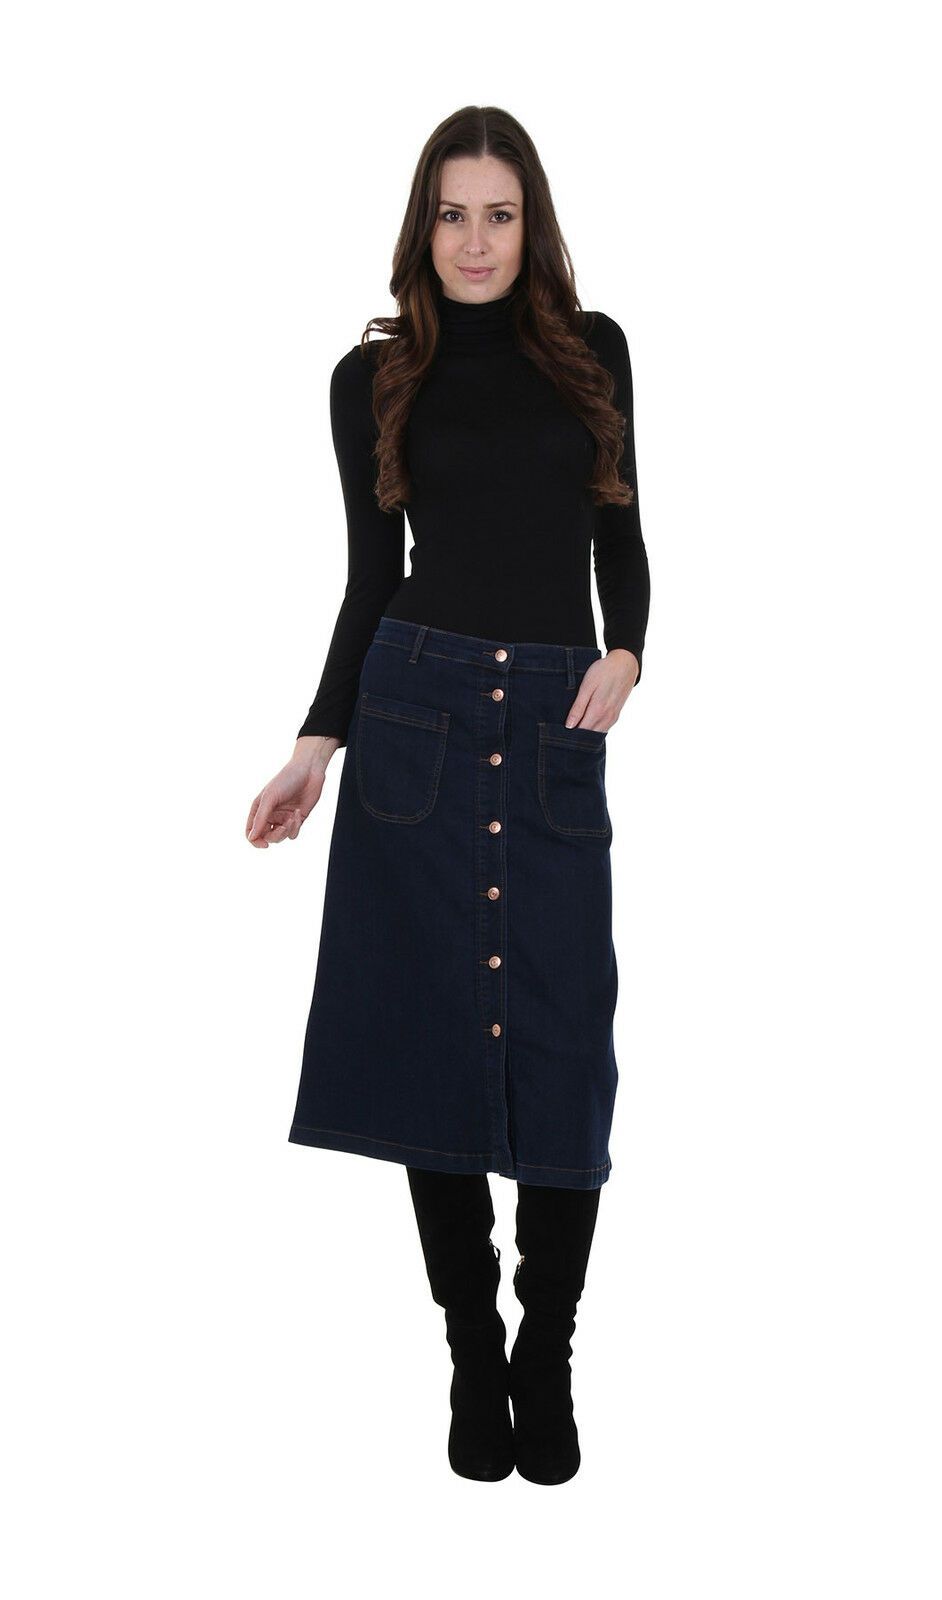 Full frontal pose with hand in front-left pocket of button front dark wash denim midi skirt from Dungarees Online.